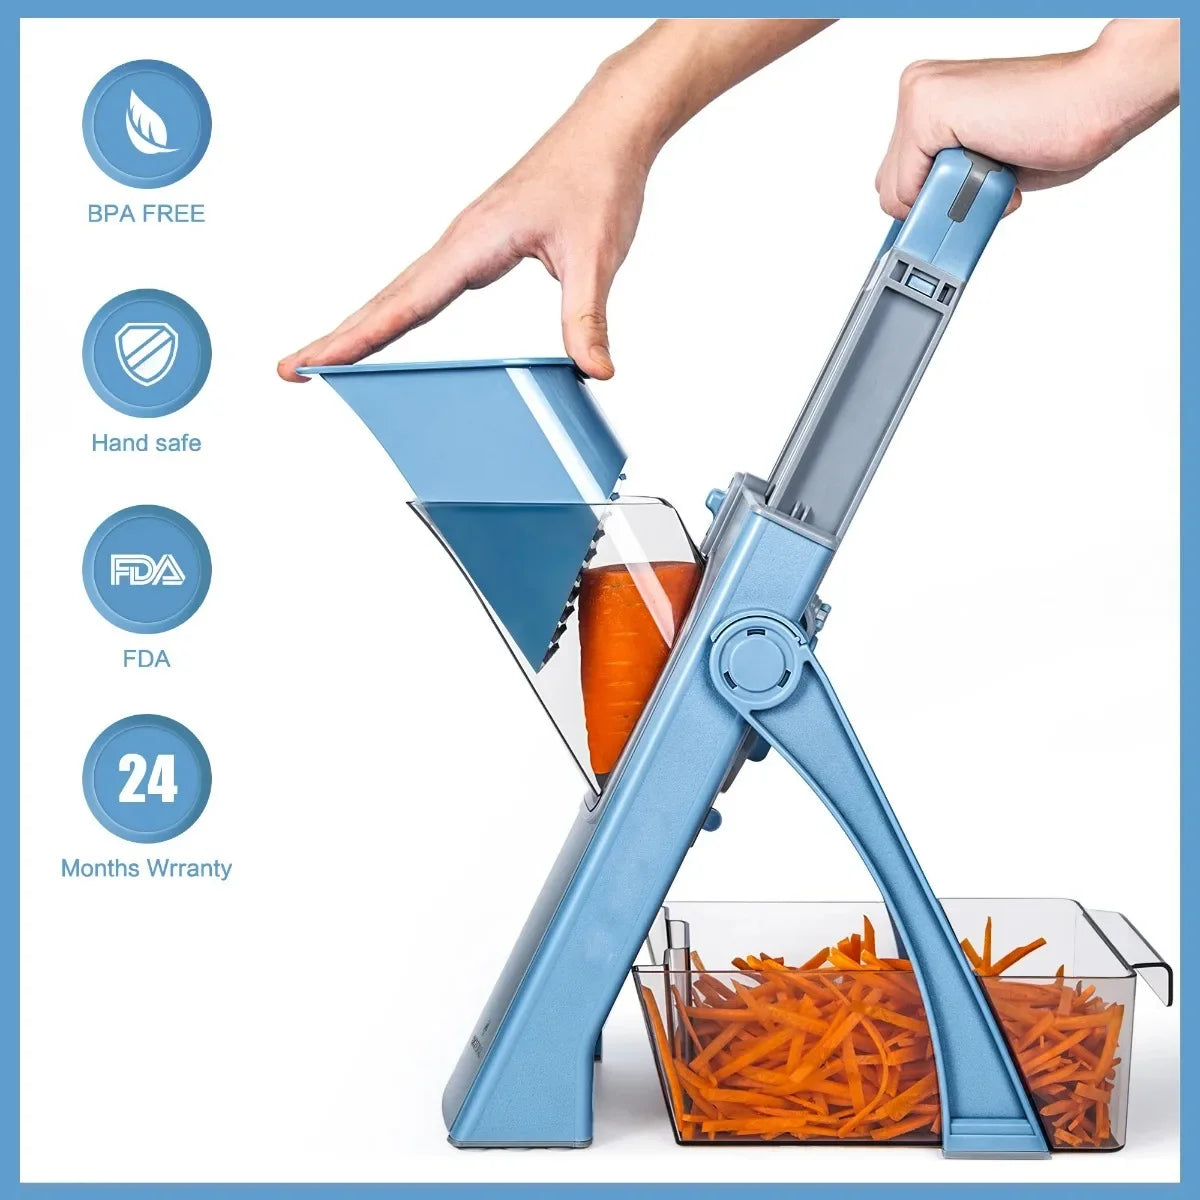 Slicer Kitchen Vegetable Cutter Chopper with Basket Adjustable Stainless Steel Cooking Gadge Knifes Set Cutting Tool Accessories